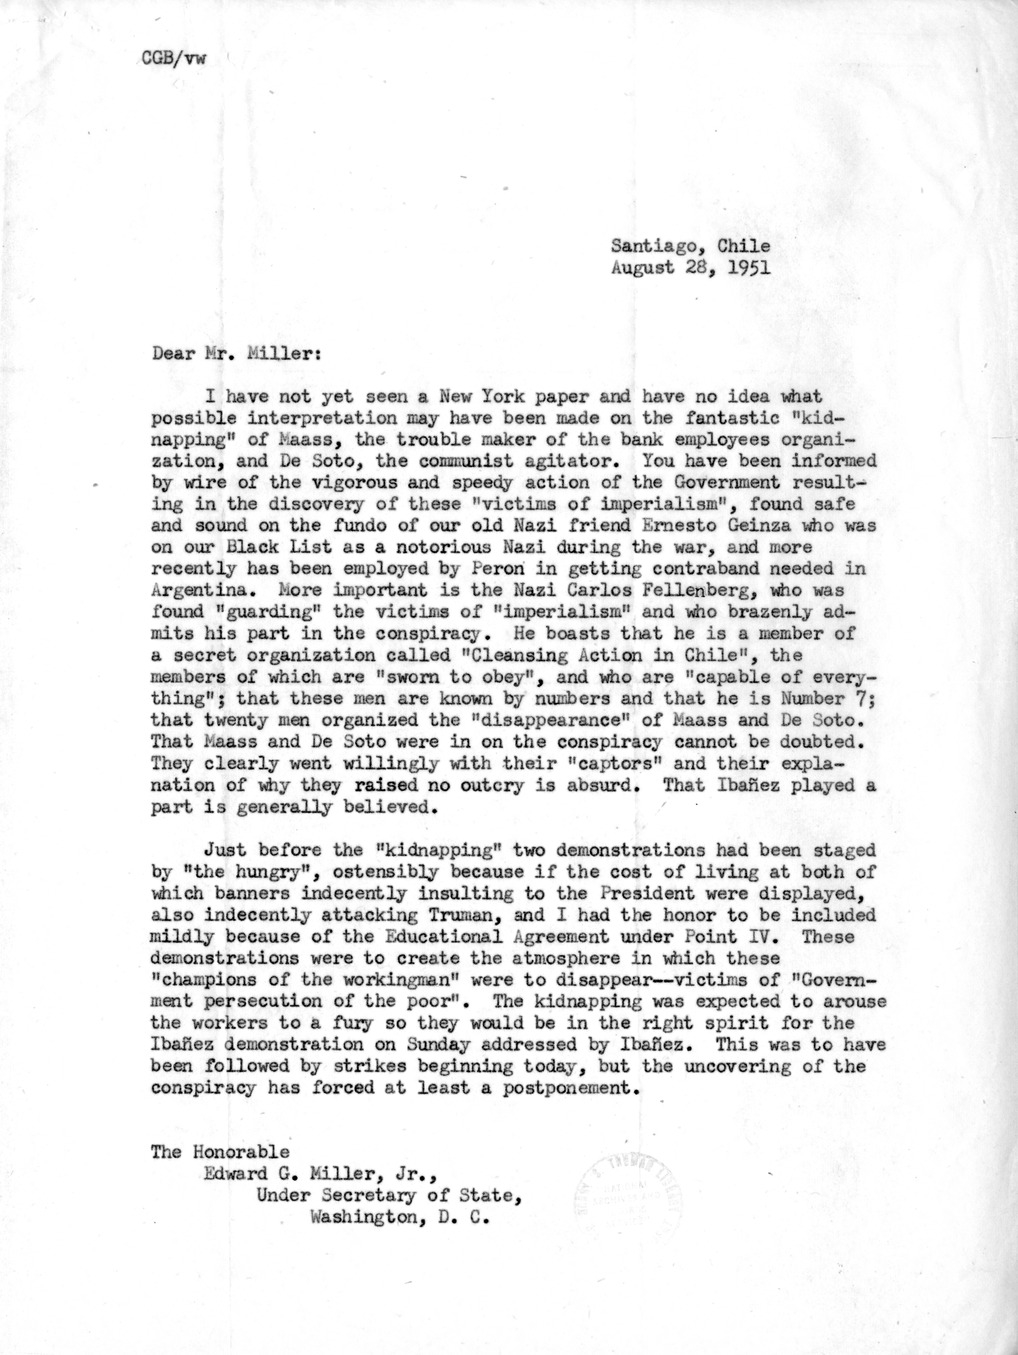 Note from Ambassador Claude Bowers to President Harry S. Truman, with Attachment